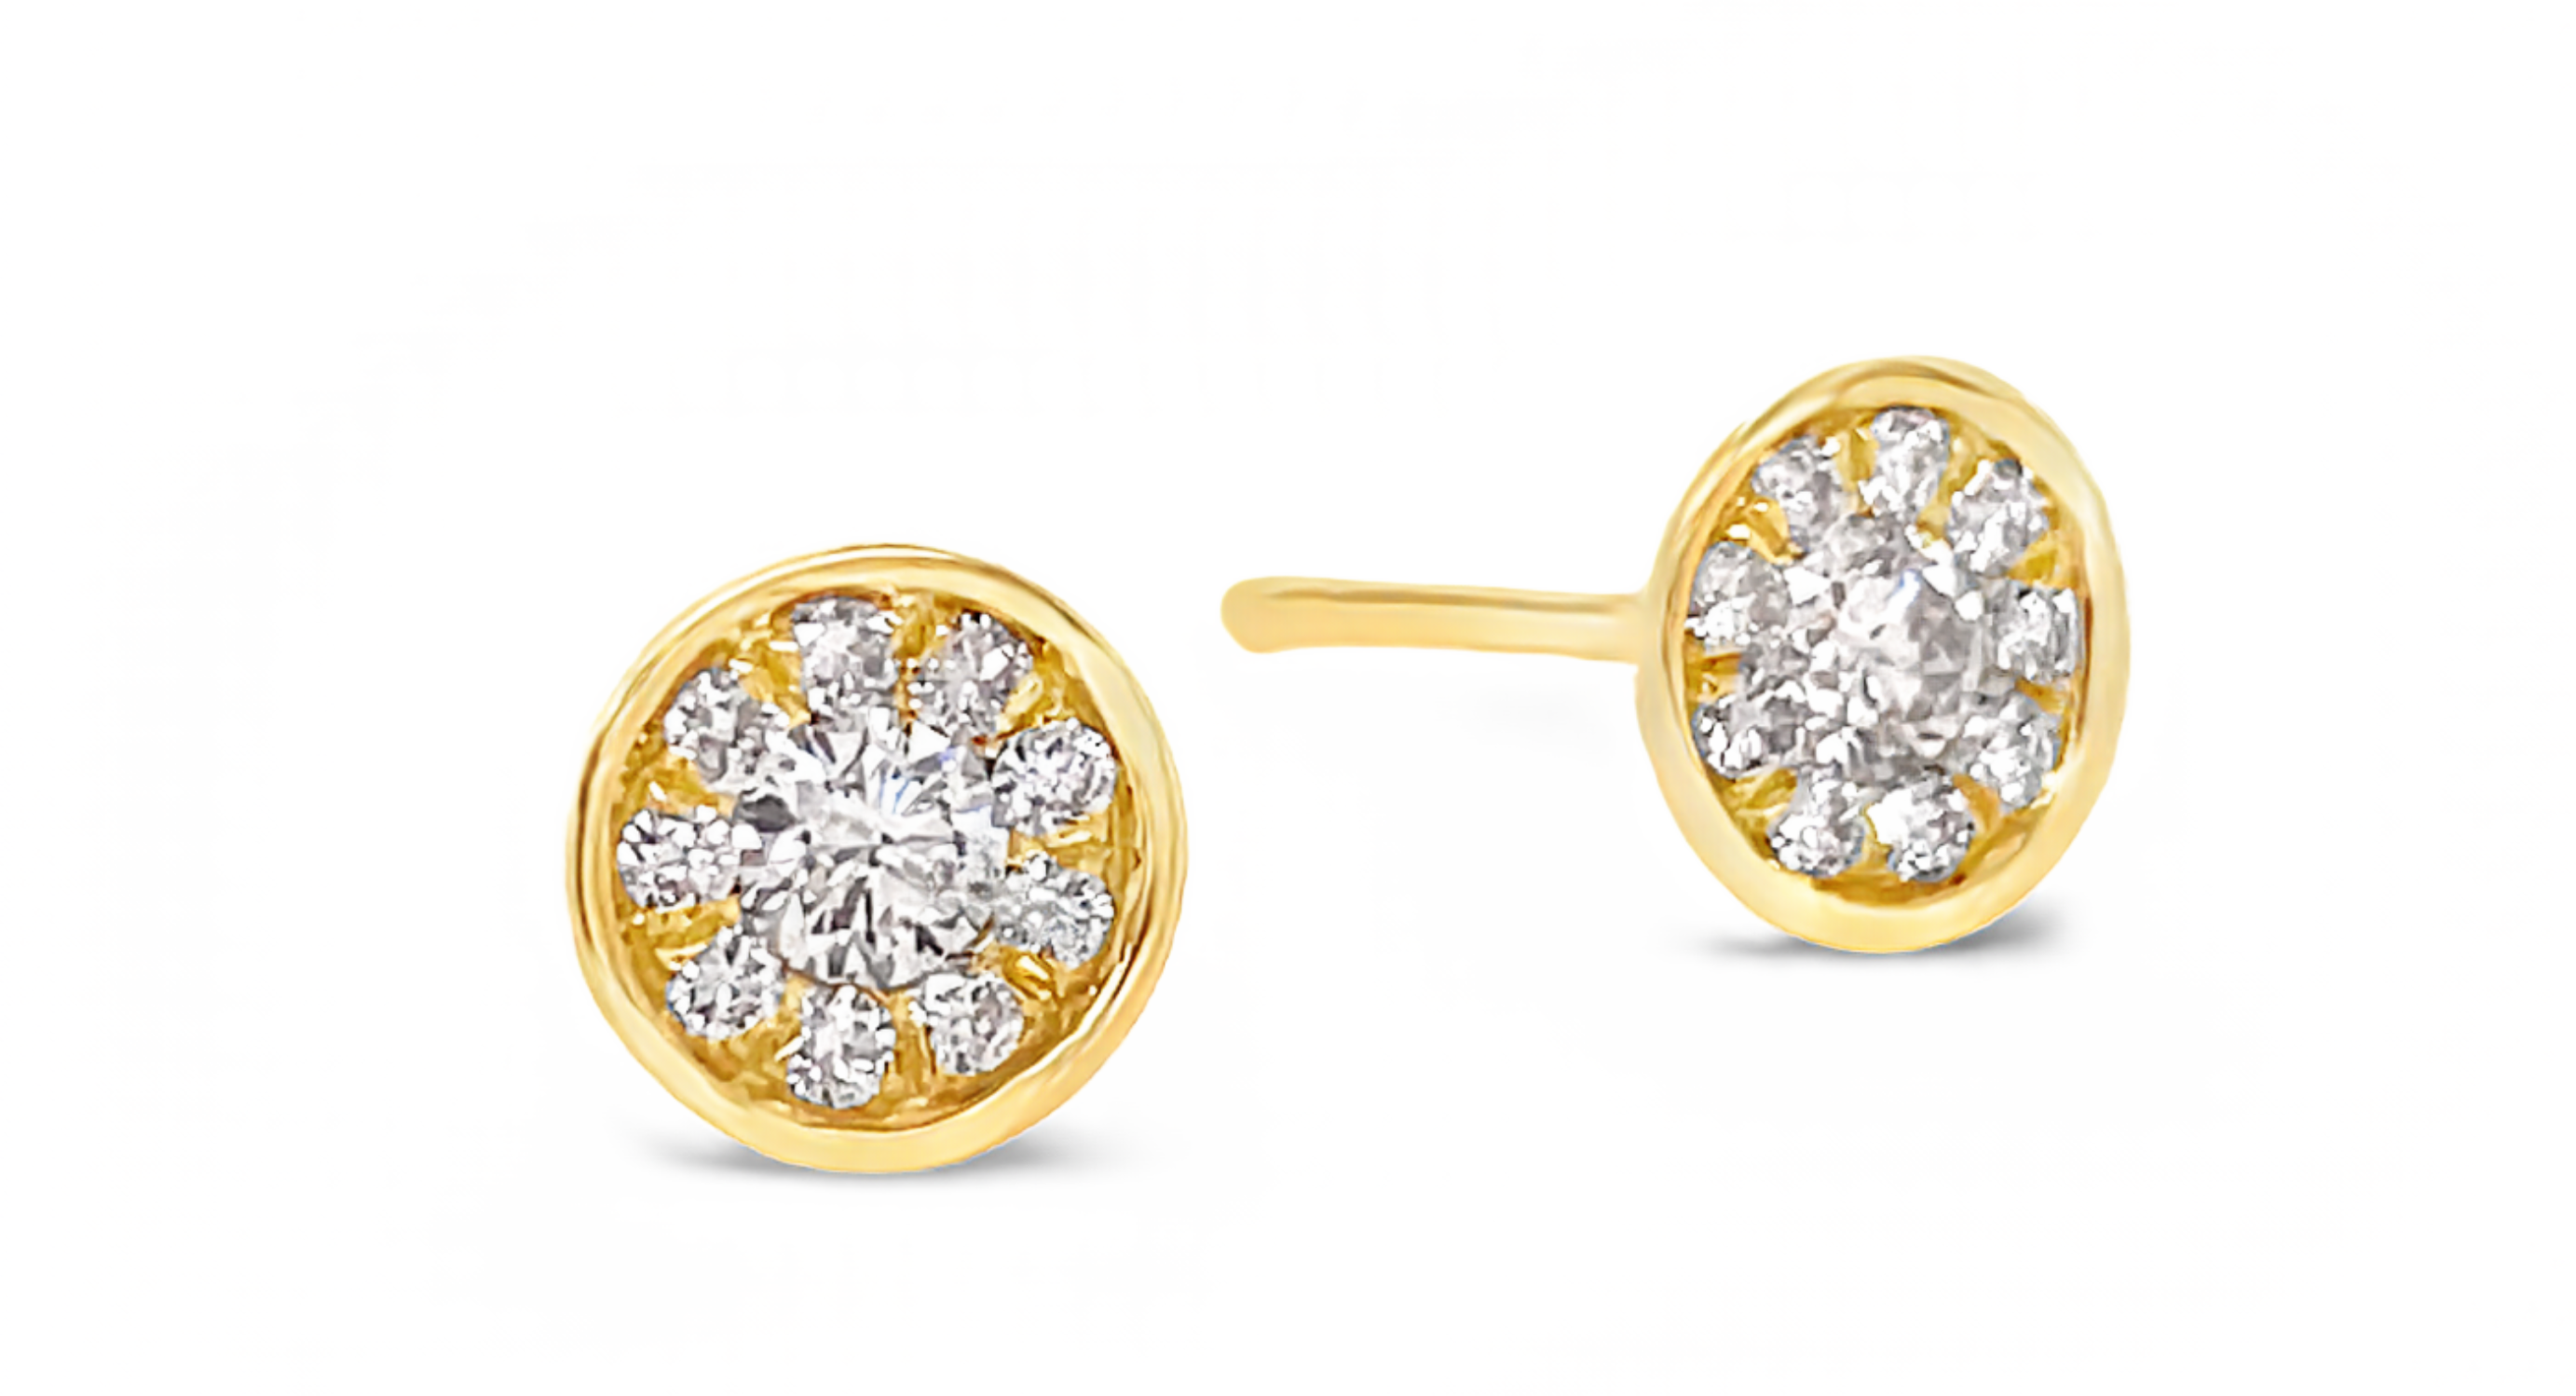 Indulge in these dainty diamond earrings, expertly crafted from 18k yellow gold. They feature secure heart-shaped friction backs and 0.30 cts round diamonds. Measuring 7.00 mm long, these earrings add a timeless beauty to your look.